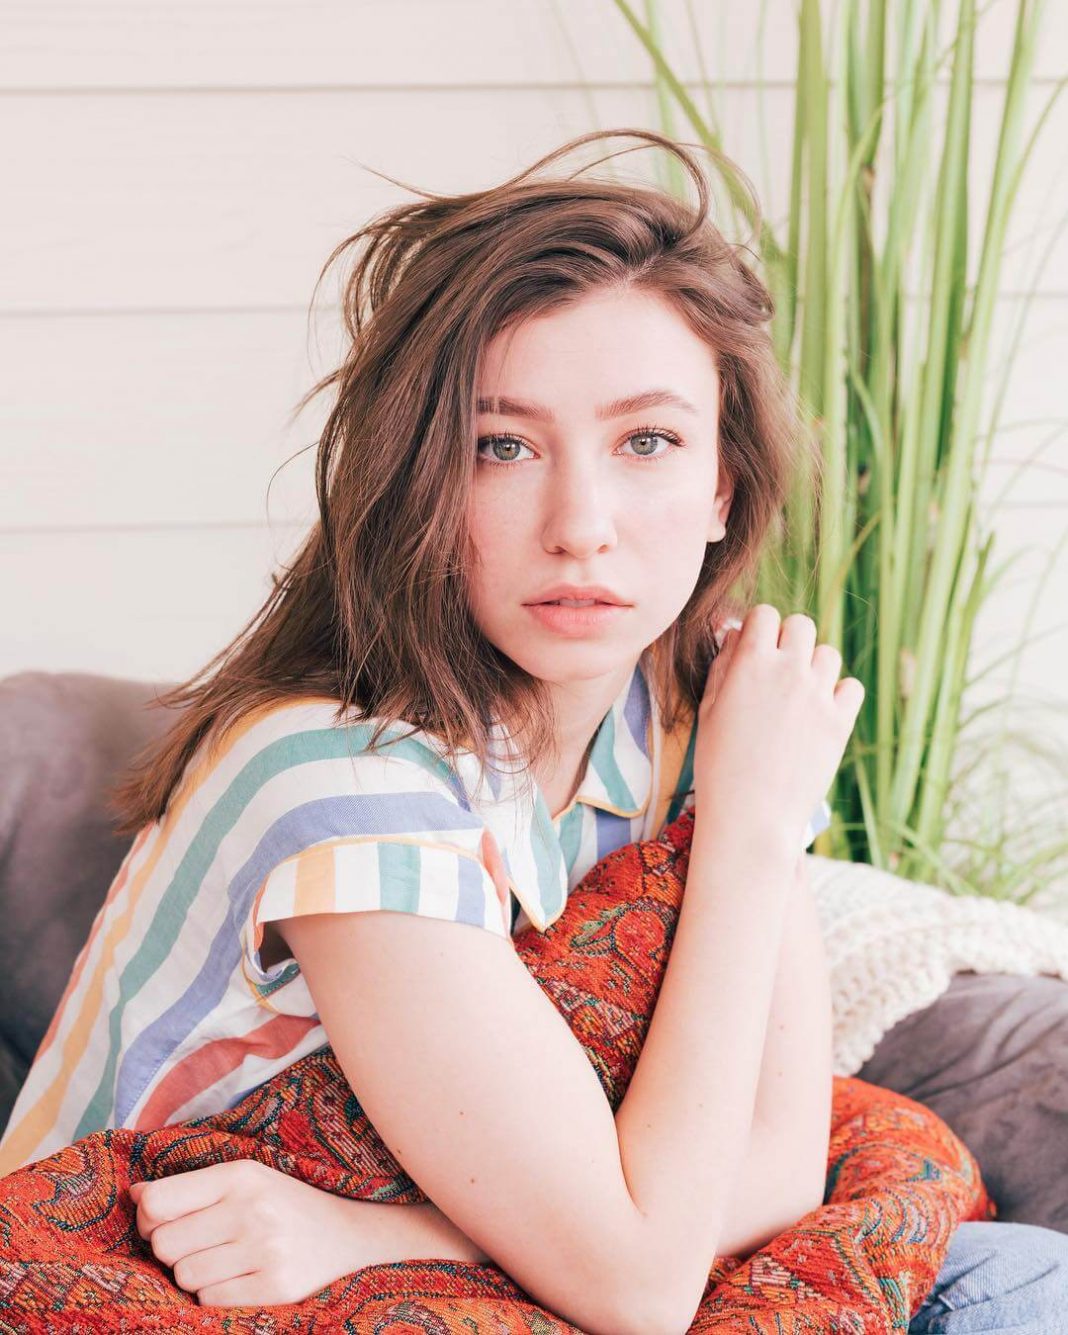 50 Katelyn Nacon Nude Pictures Which Prove Beauty Beyond Recognition 62